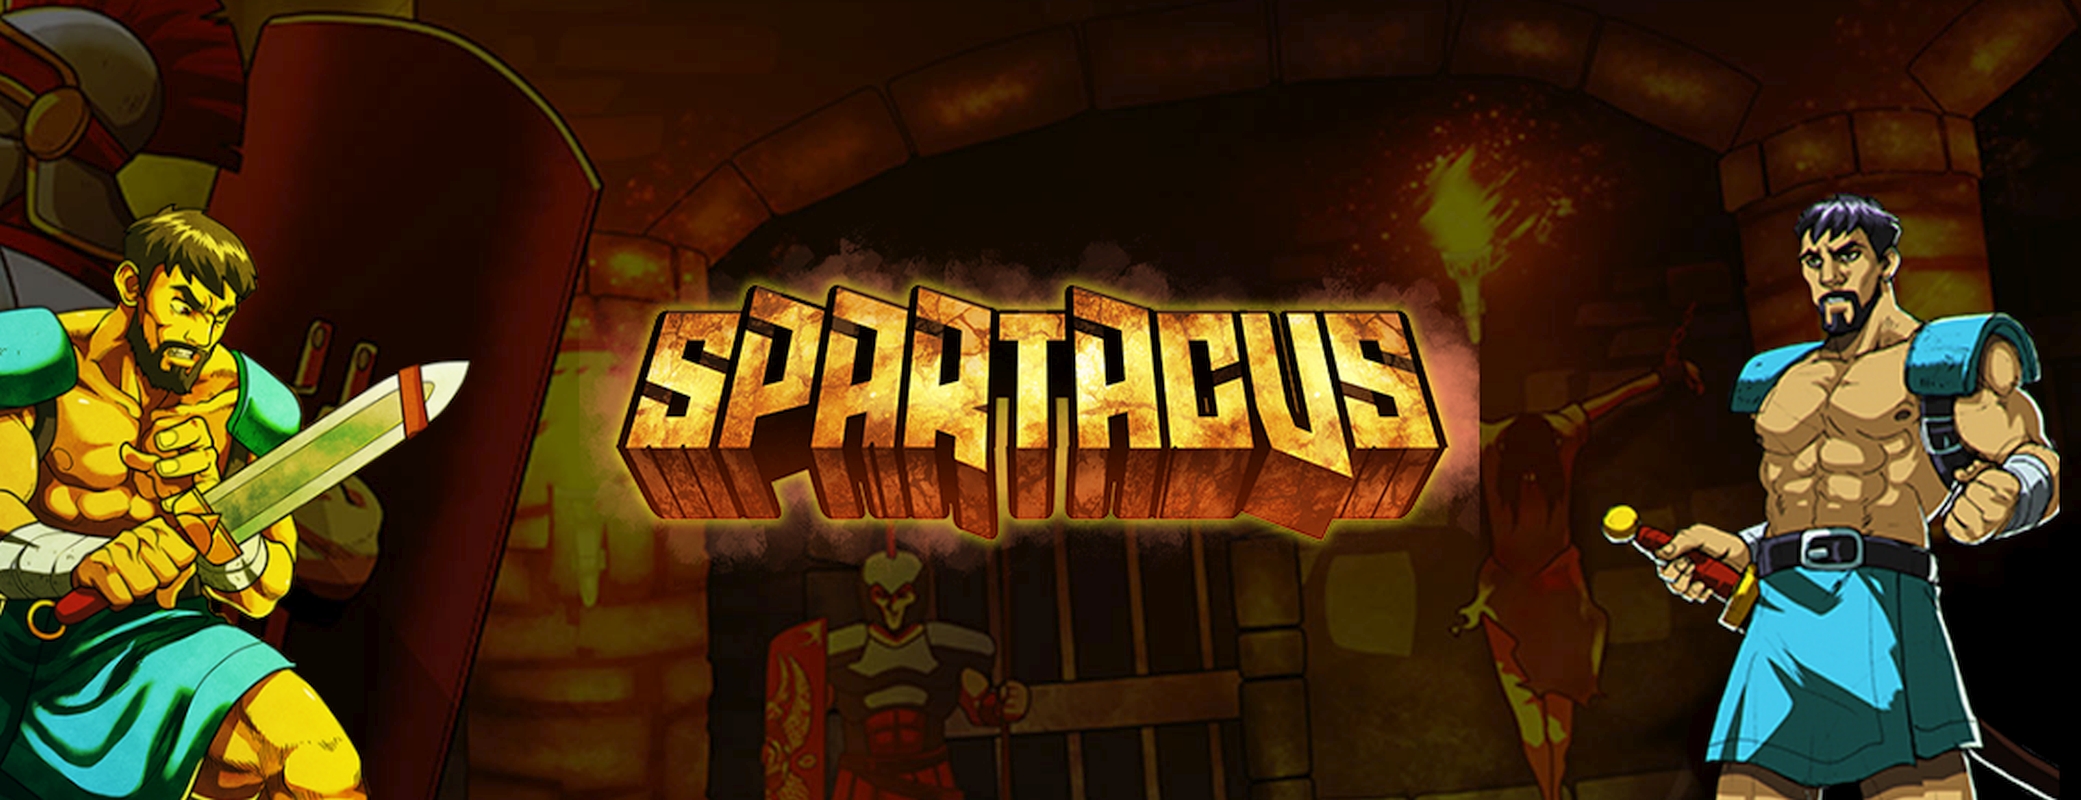 Sword and Sandals: Spartacus Mobile Game Announced Following PC Release